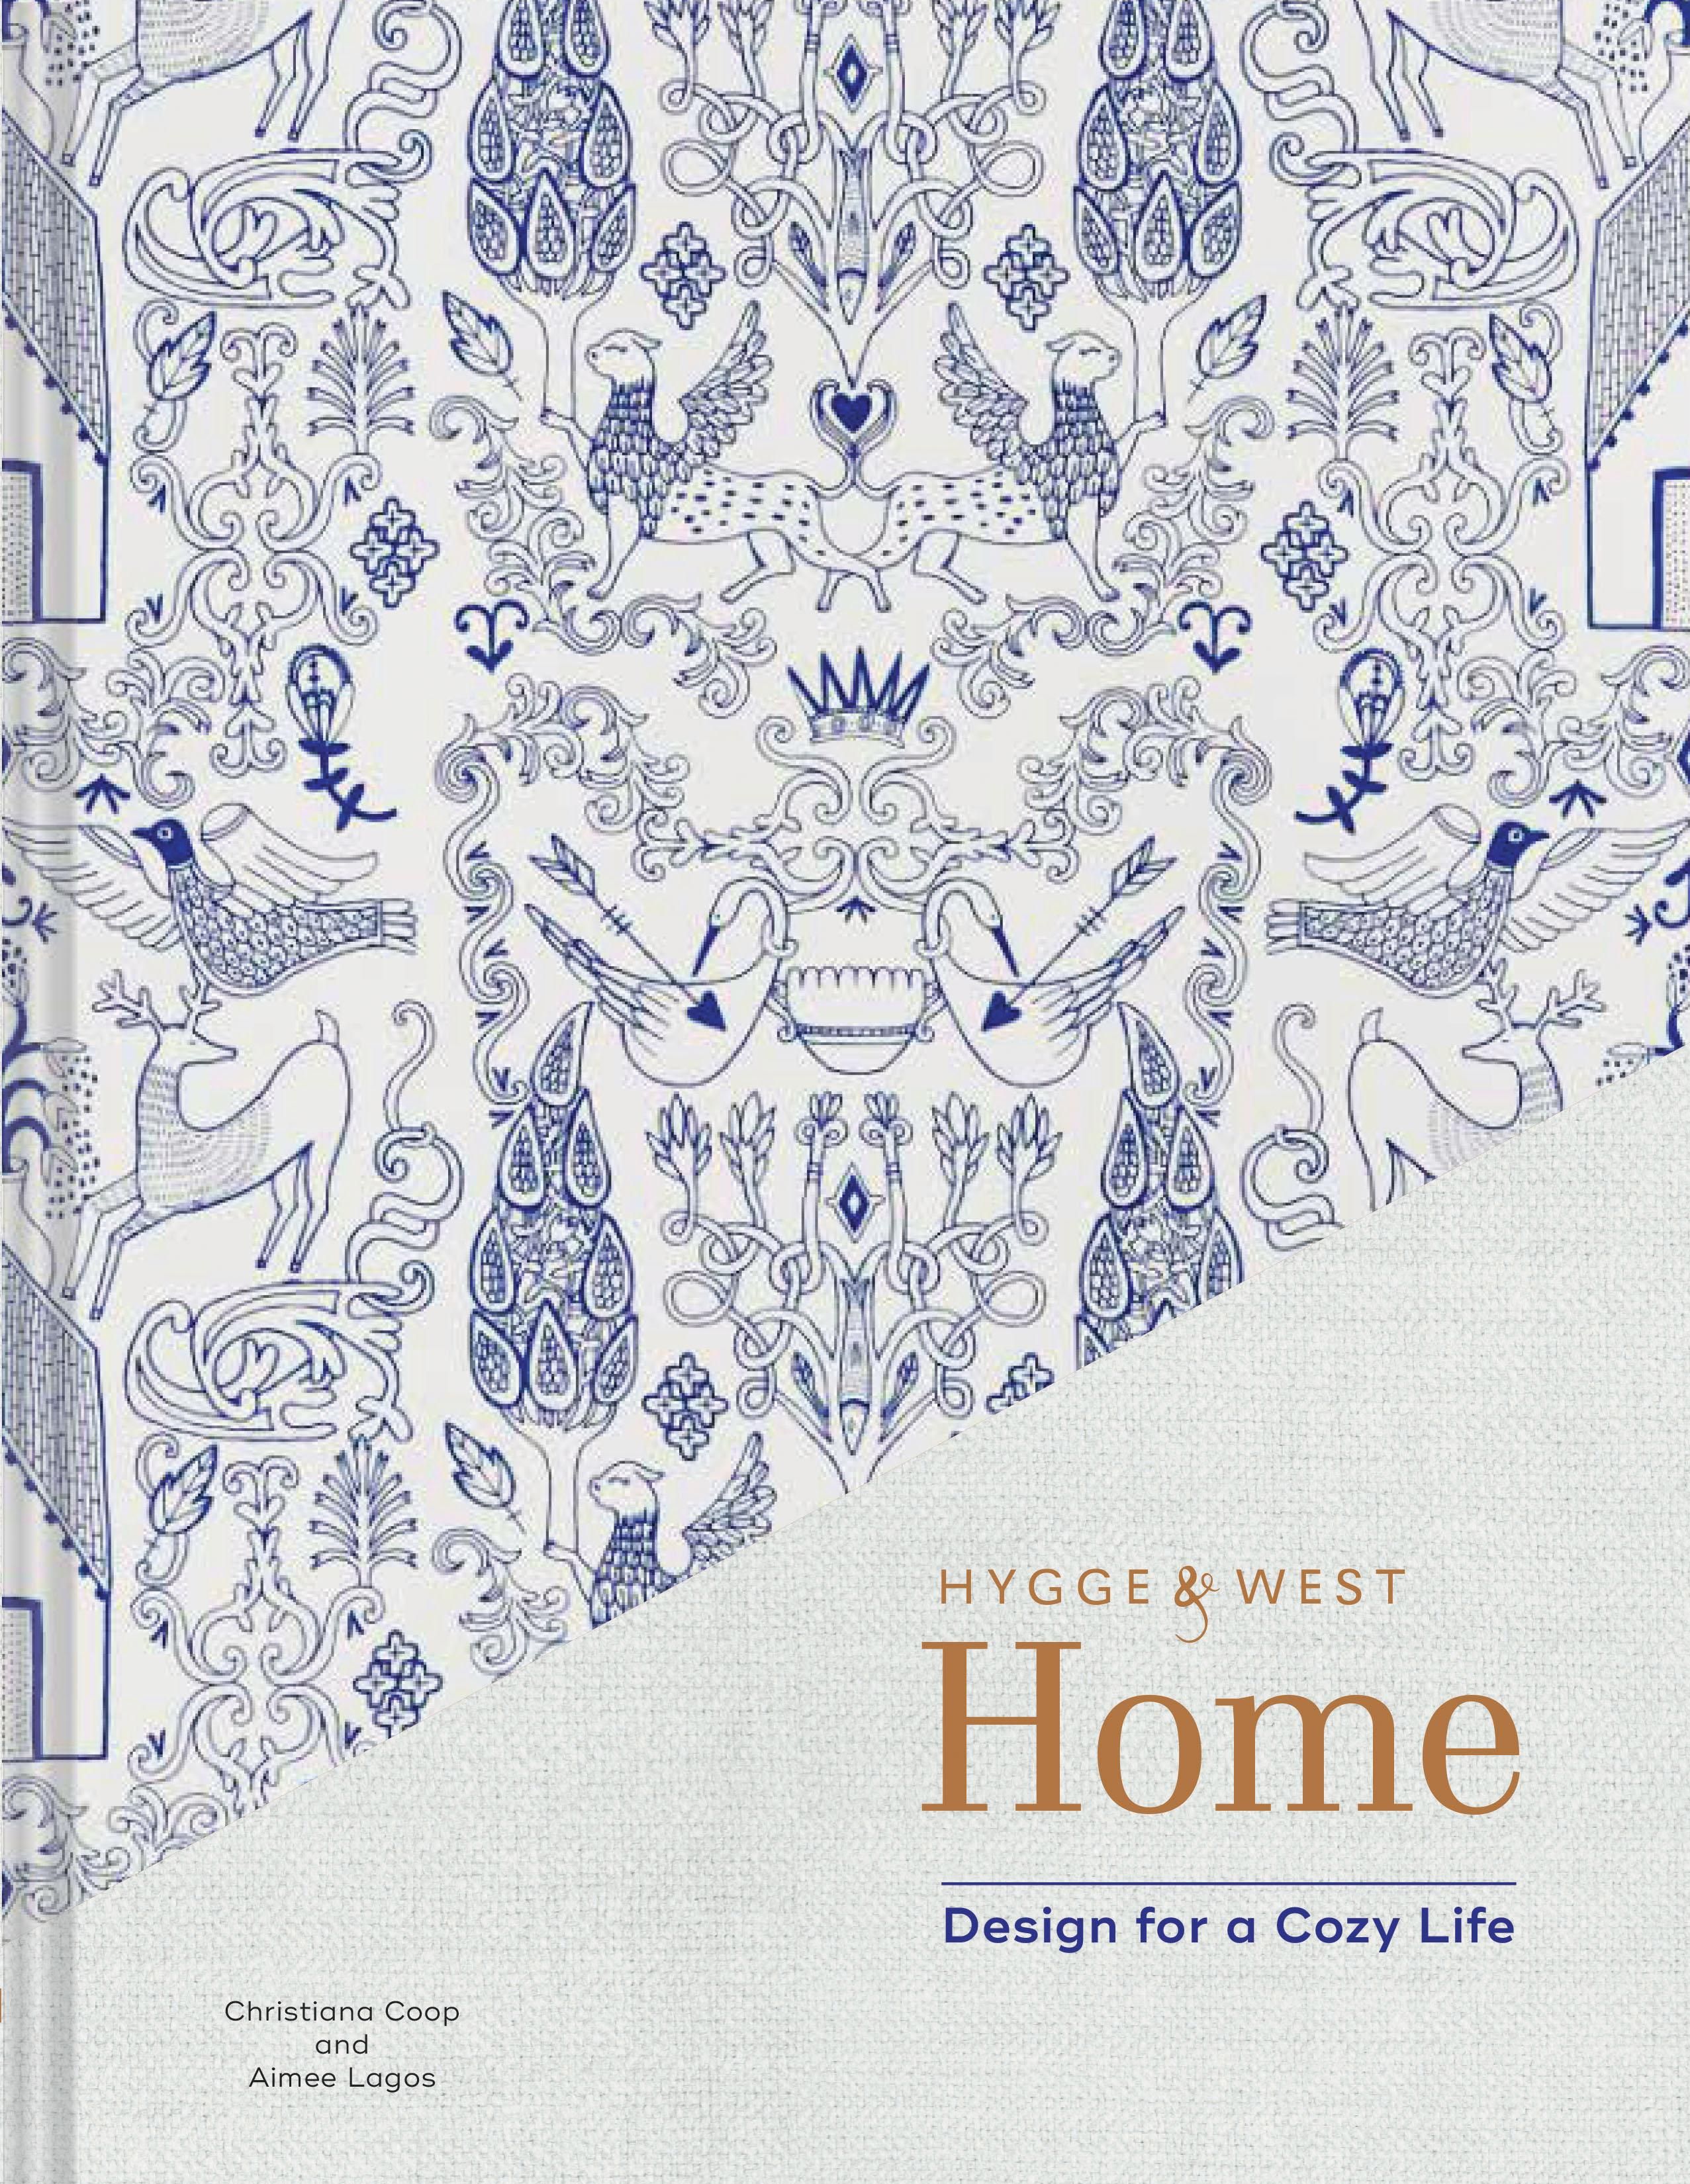 Hygge & West Home : Design for a Cozy Life (Home Design Books, Cozy Books, Books about Interior D... | Walmart (US)